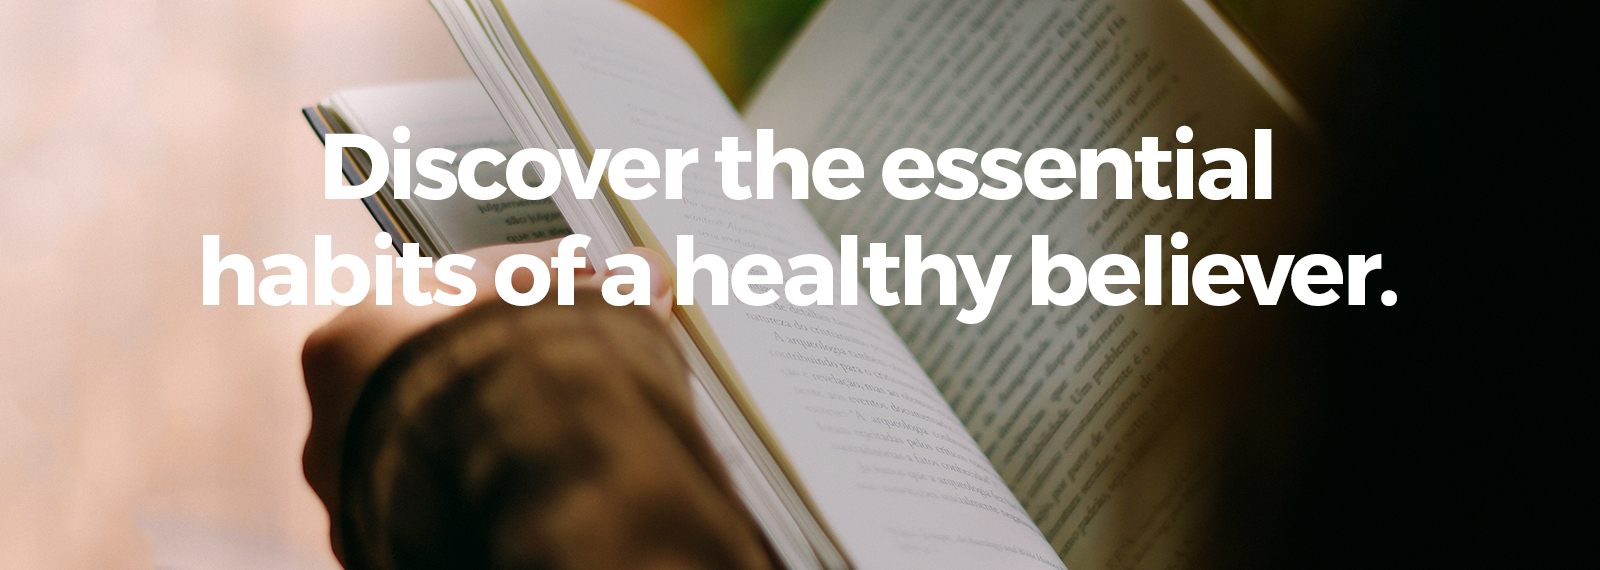 The Essentials - Episode 4 - The Healthy Habit of Godly Relationships